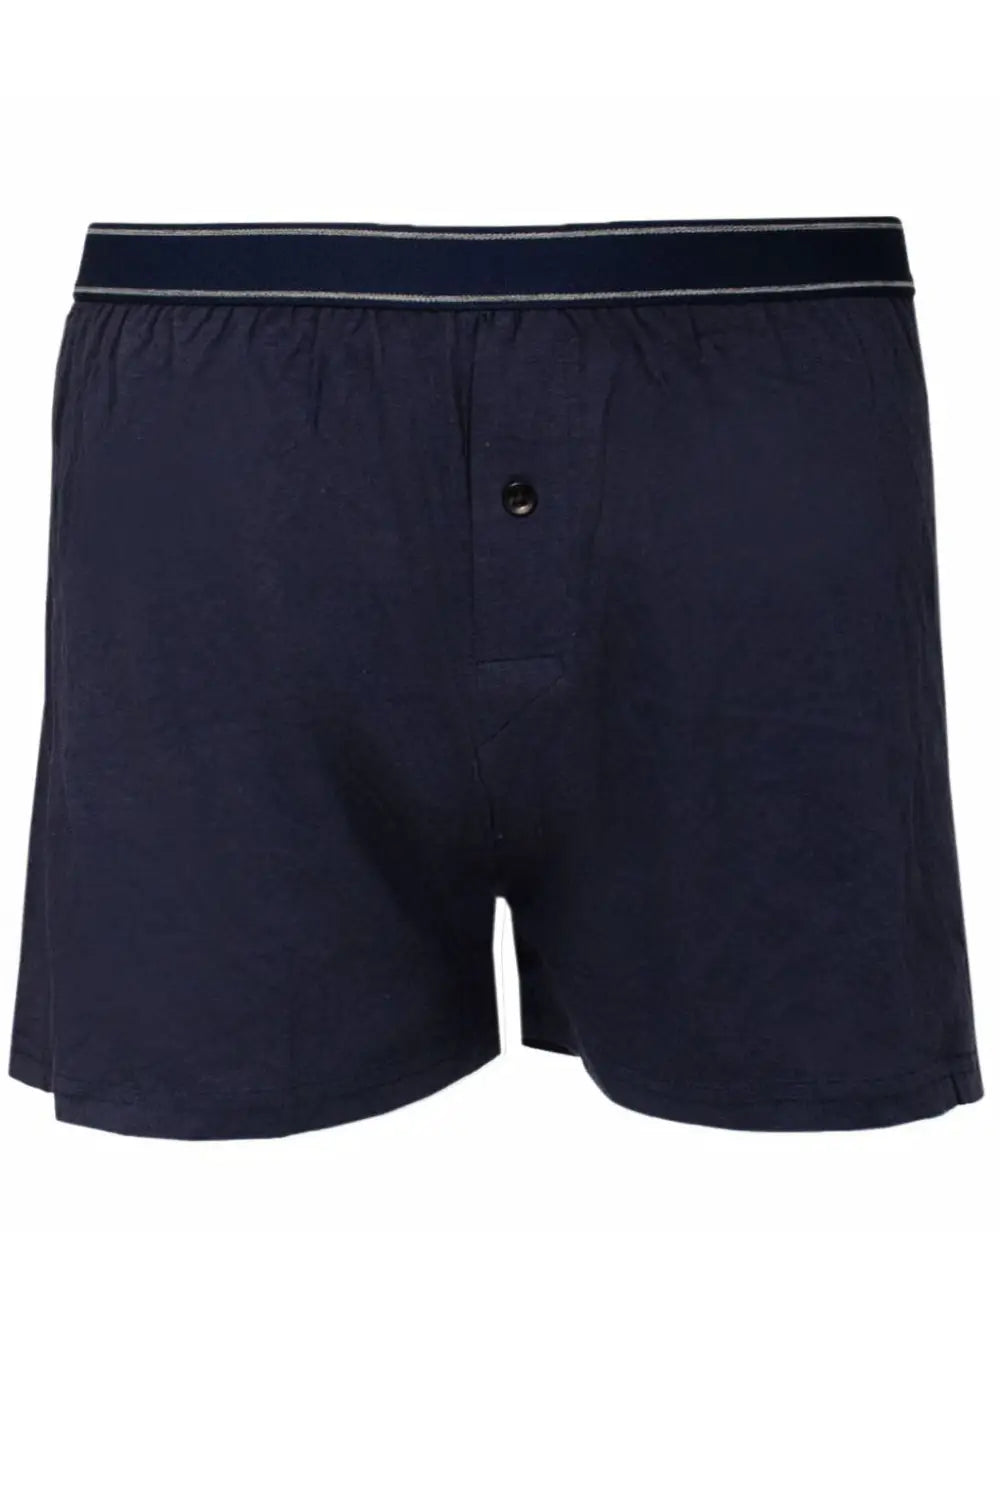 M&S Cotton Jersey Boxers (3 pack)